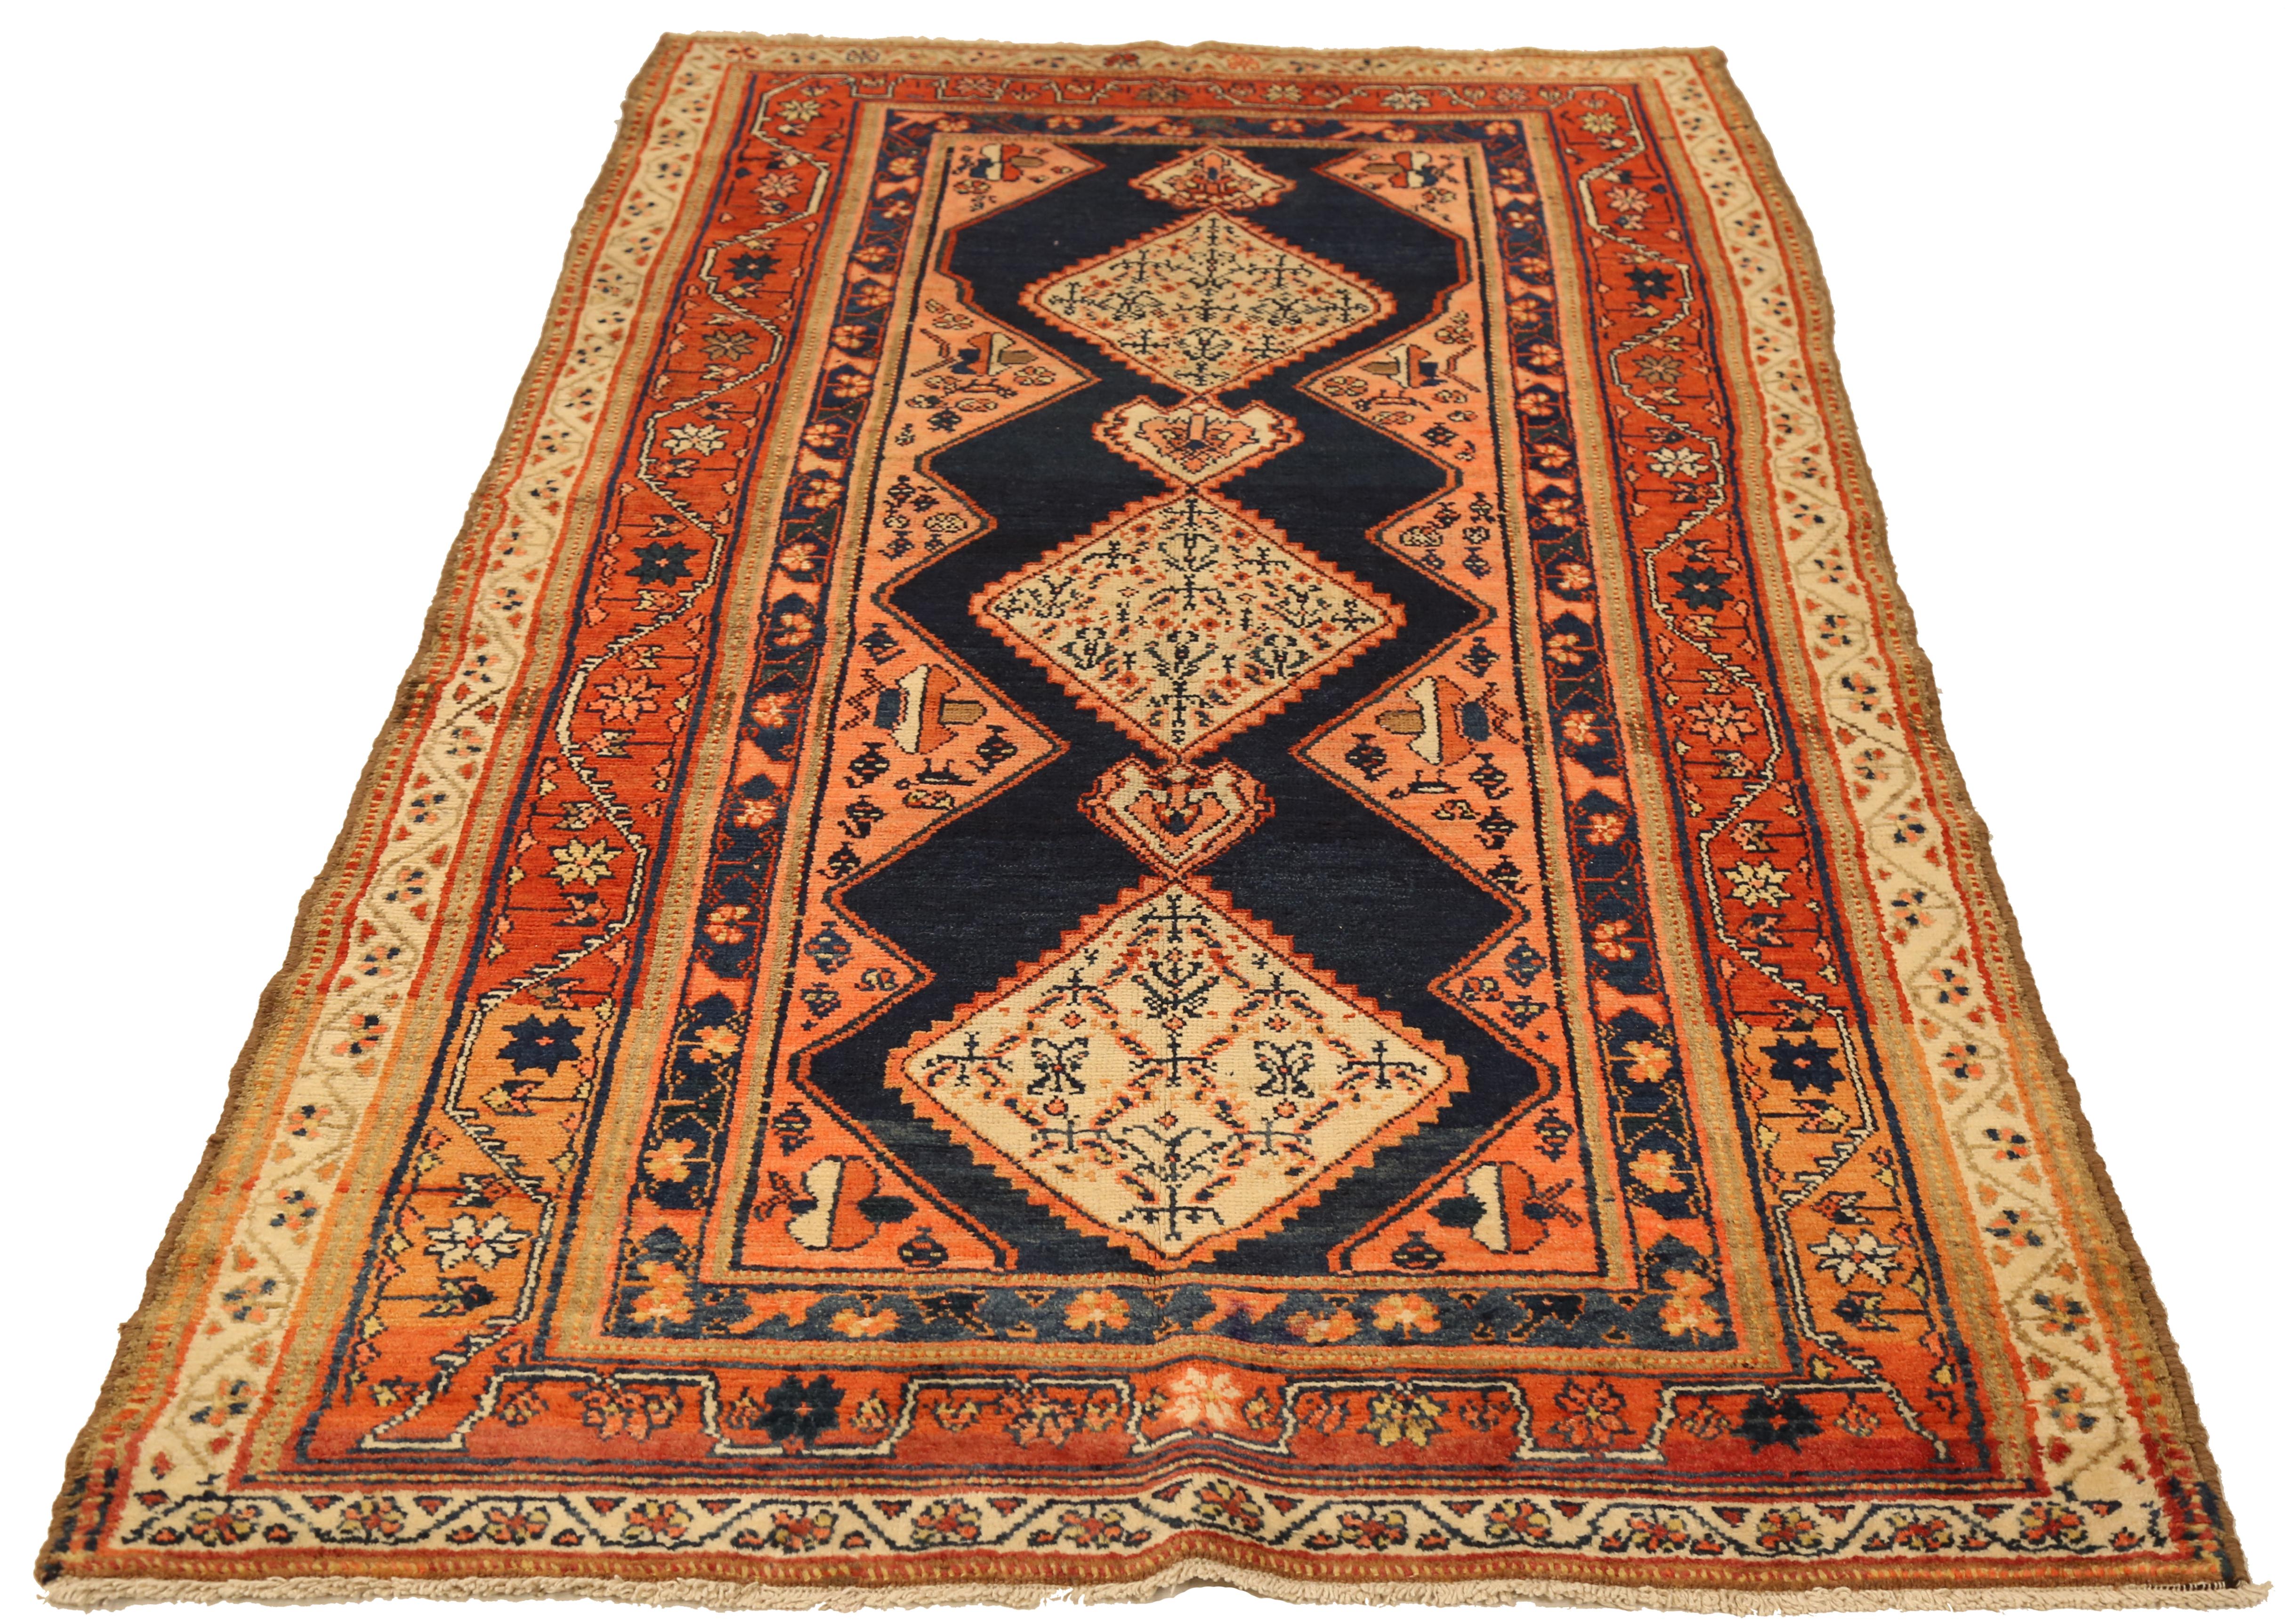 Antique hand-woven Persian area rug made from fine wool and all-natural vegetable dyes that are safe for people and pets. It features traditional Malayer weaving depicting elaborate 'Boteh' patterns that represents life and eternity in Persian